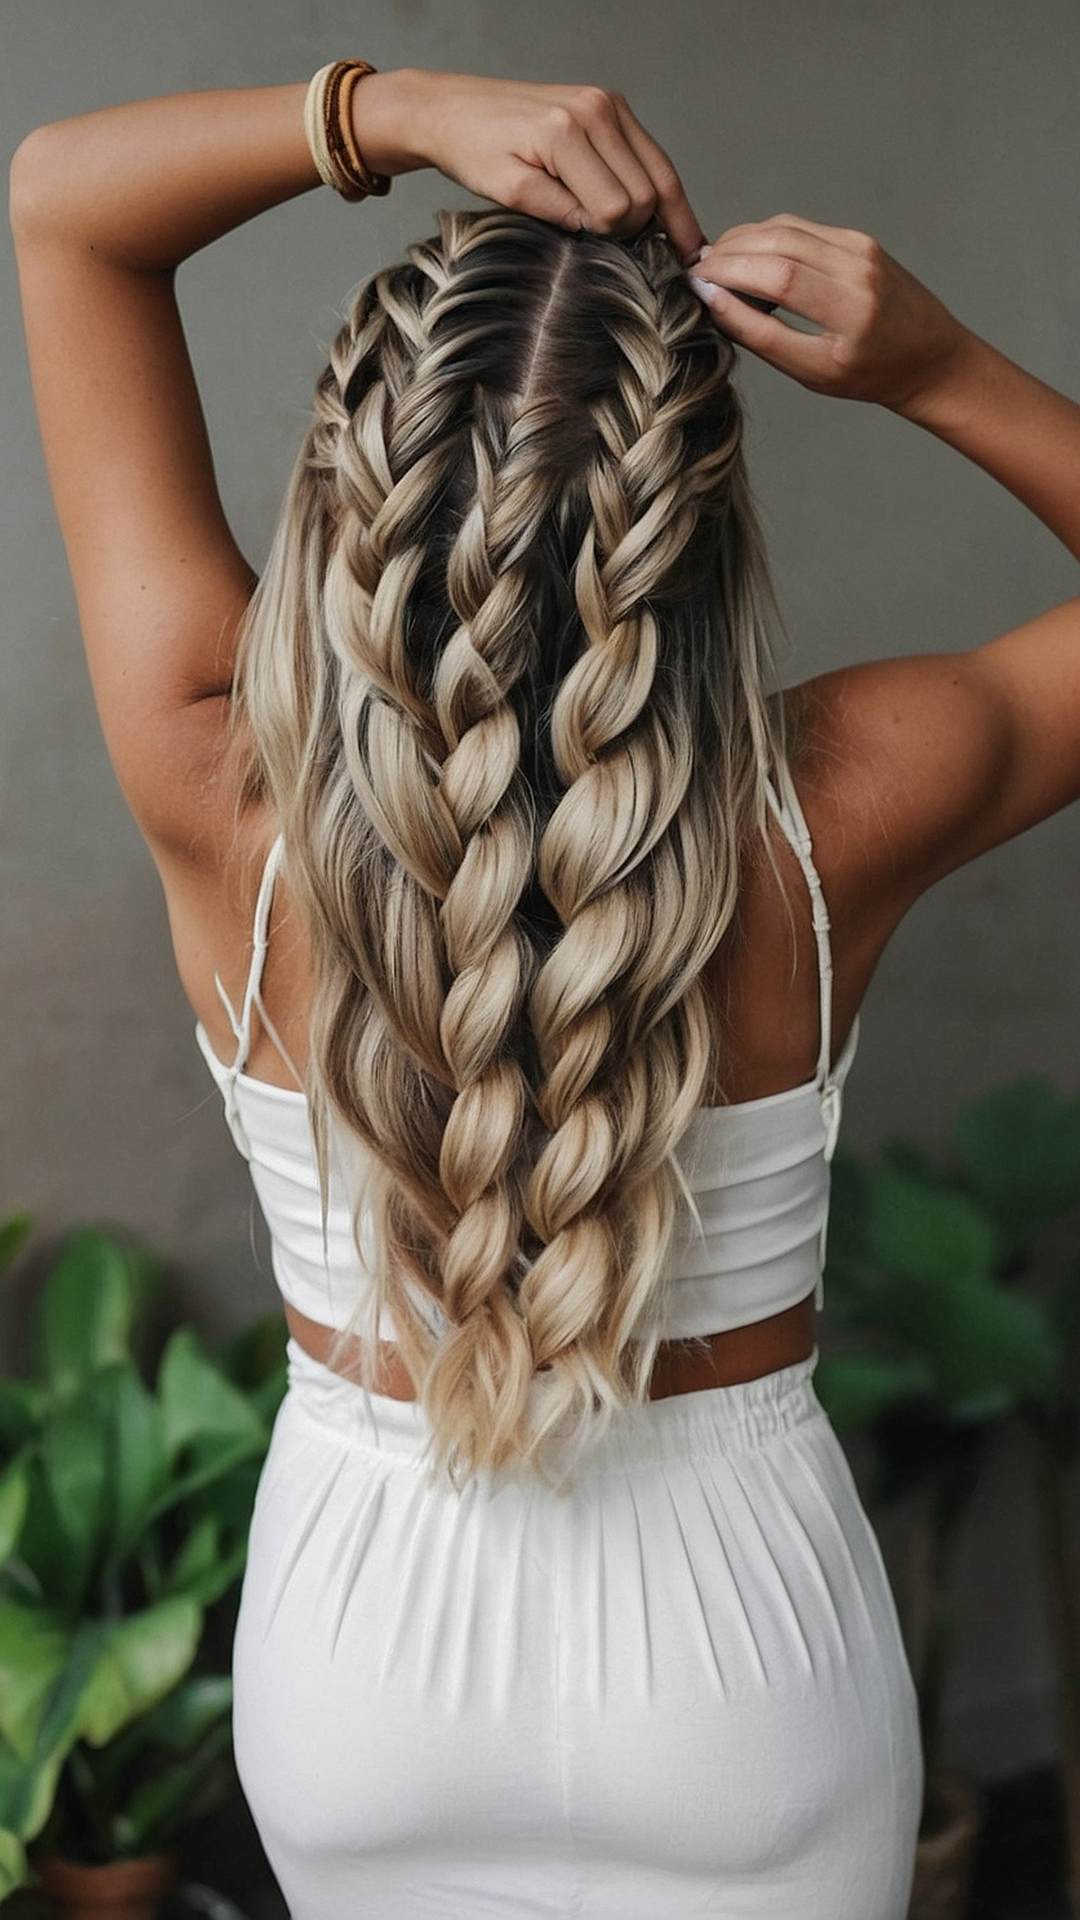 Knot Just Any Braid: Exceptional Hairstyle Ideas